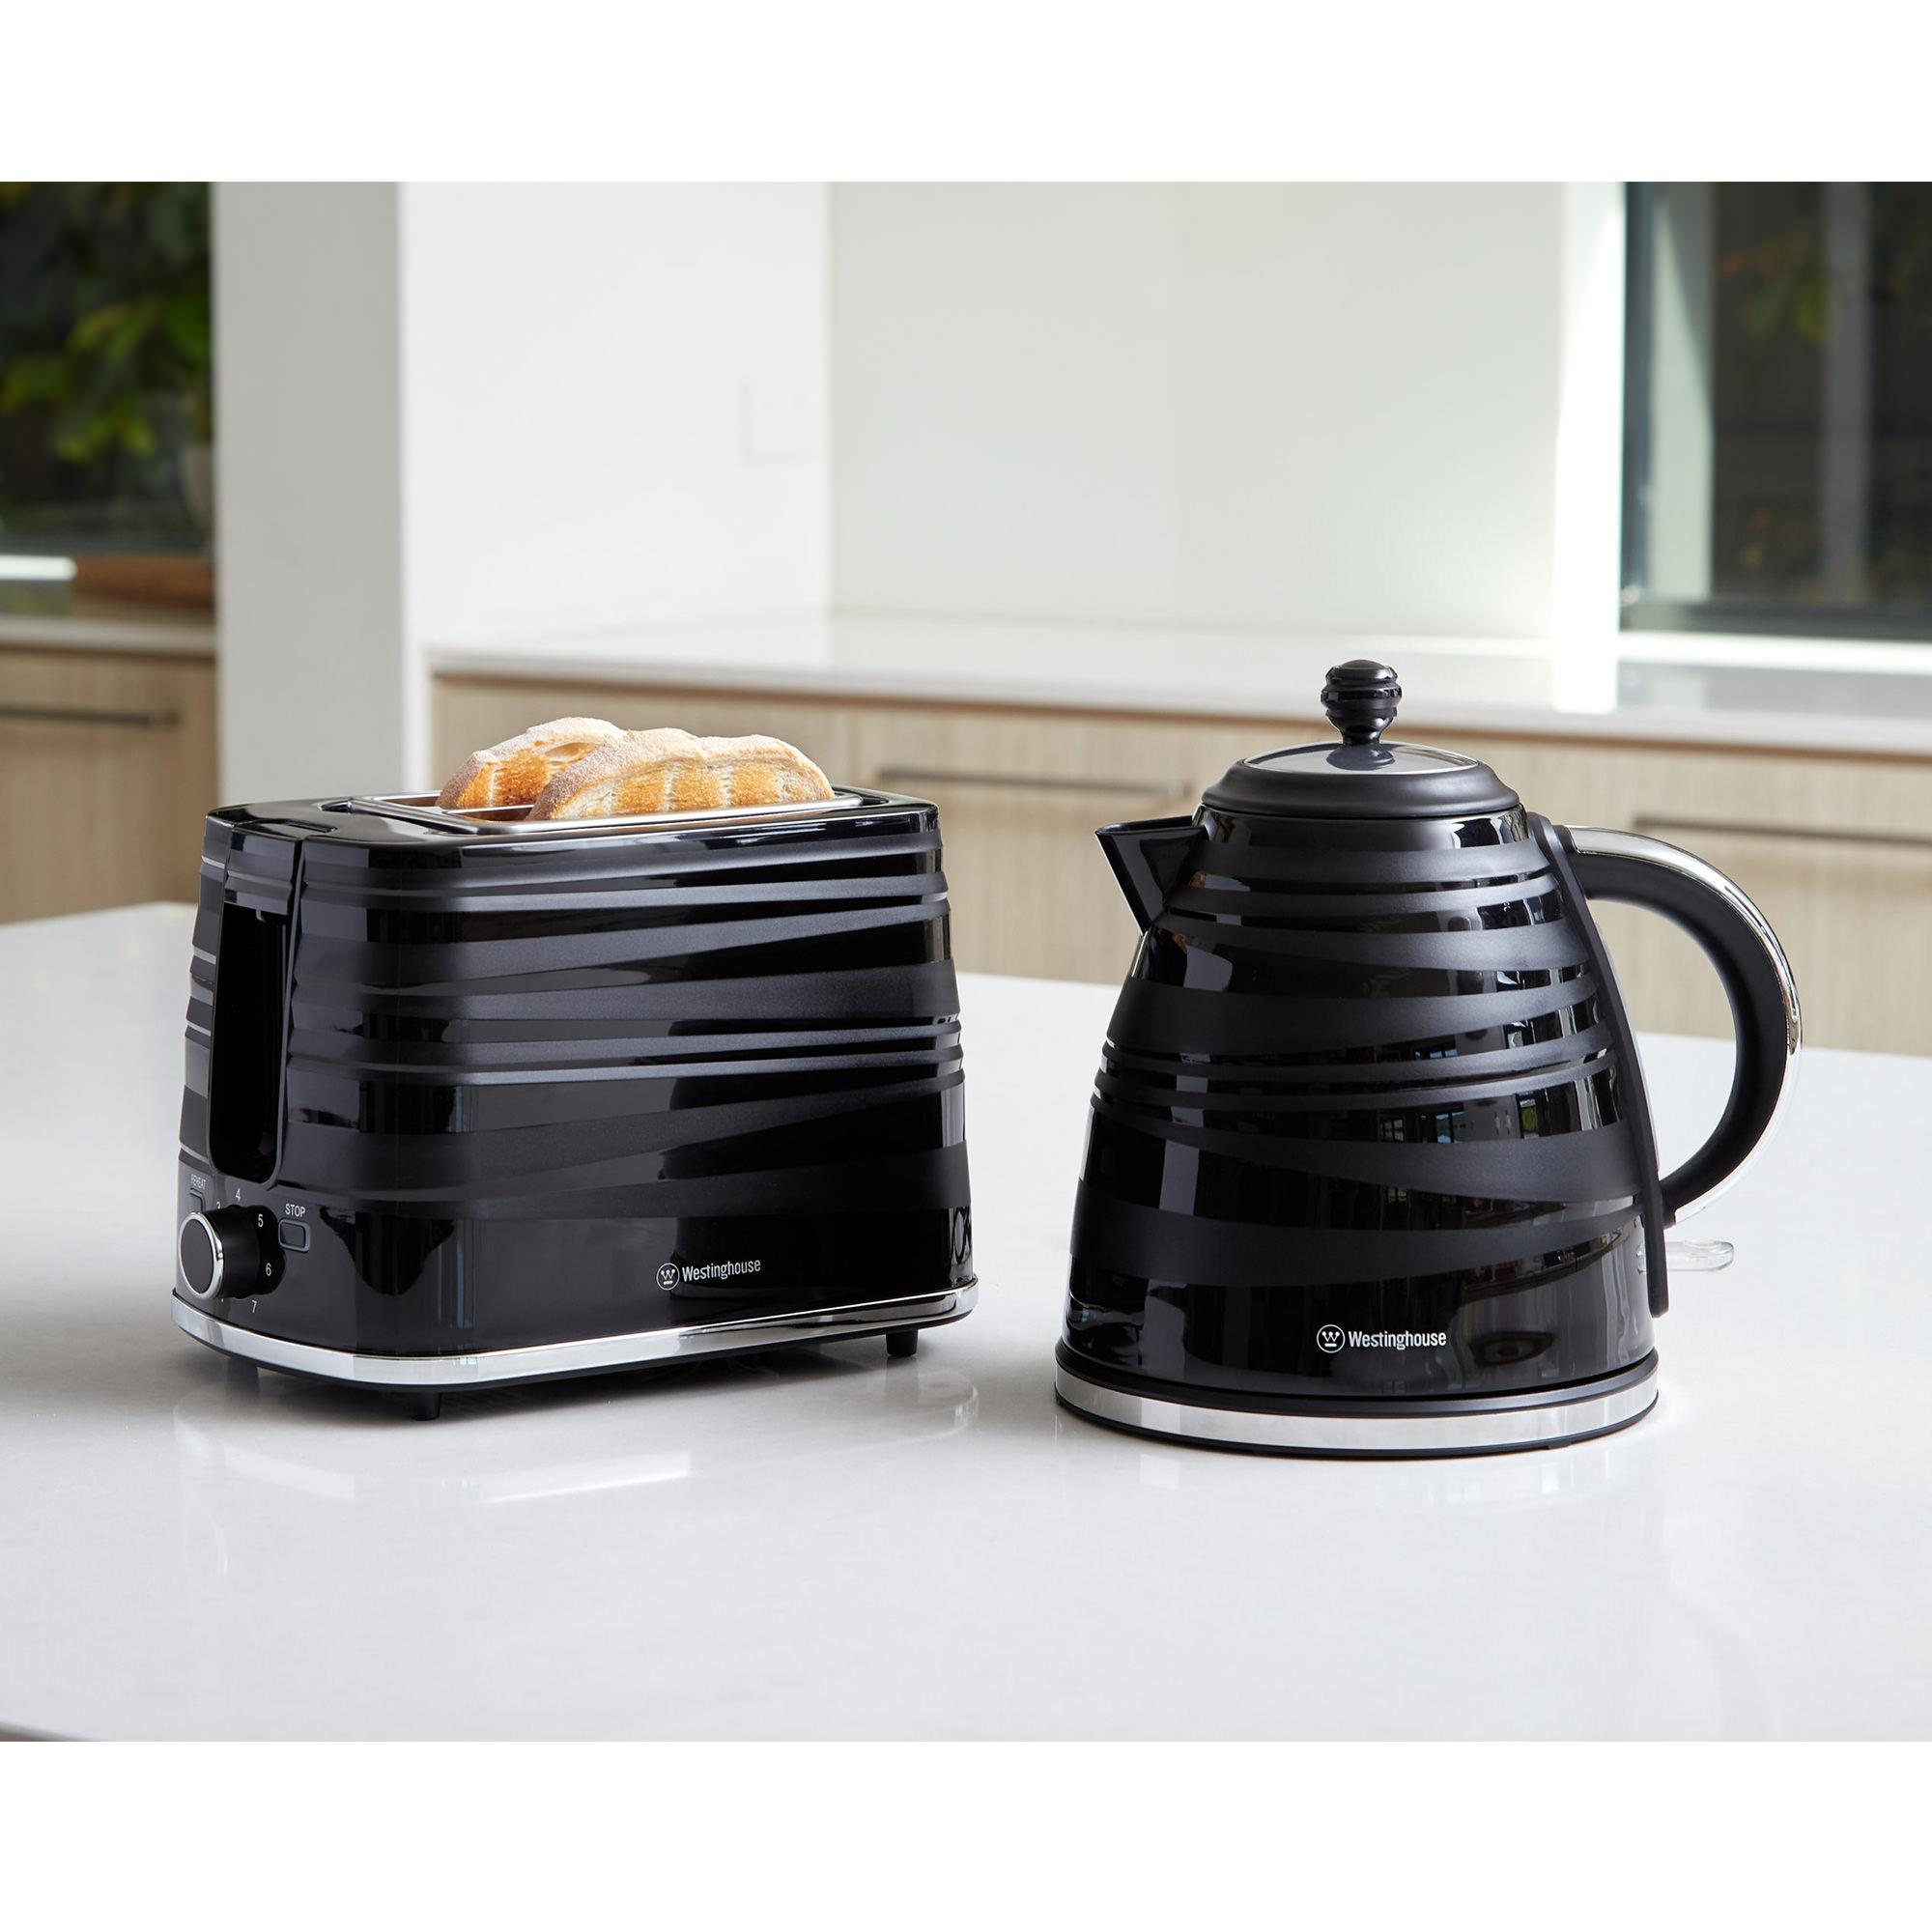 Westinghouse Kettle and Toaster Pack Black Image 3